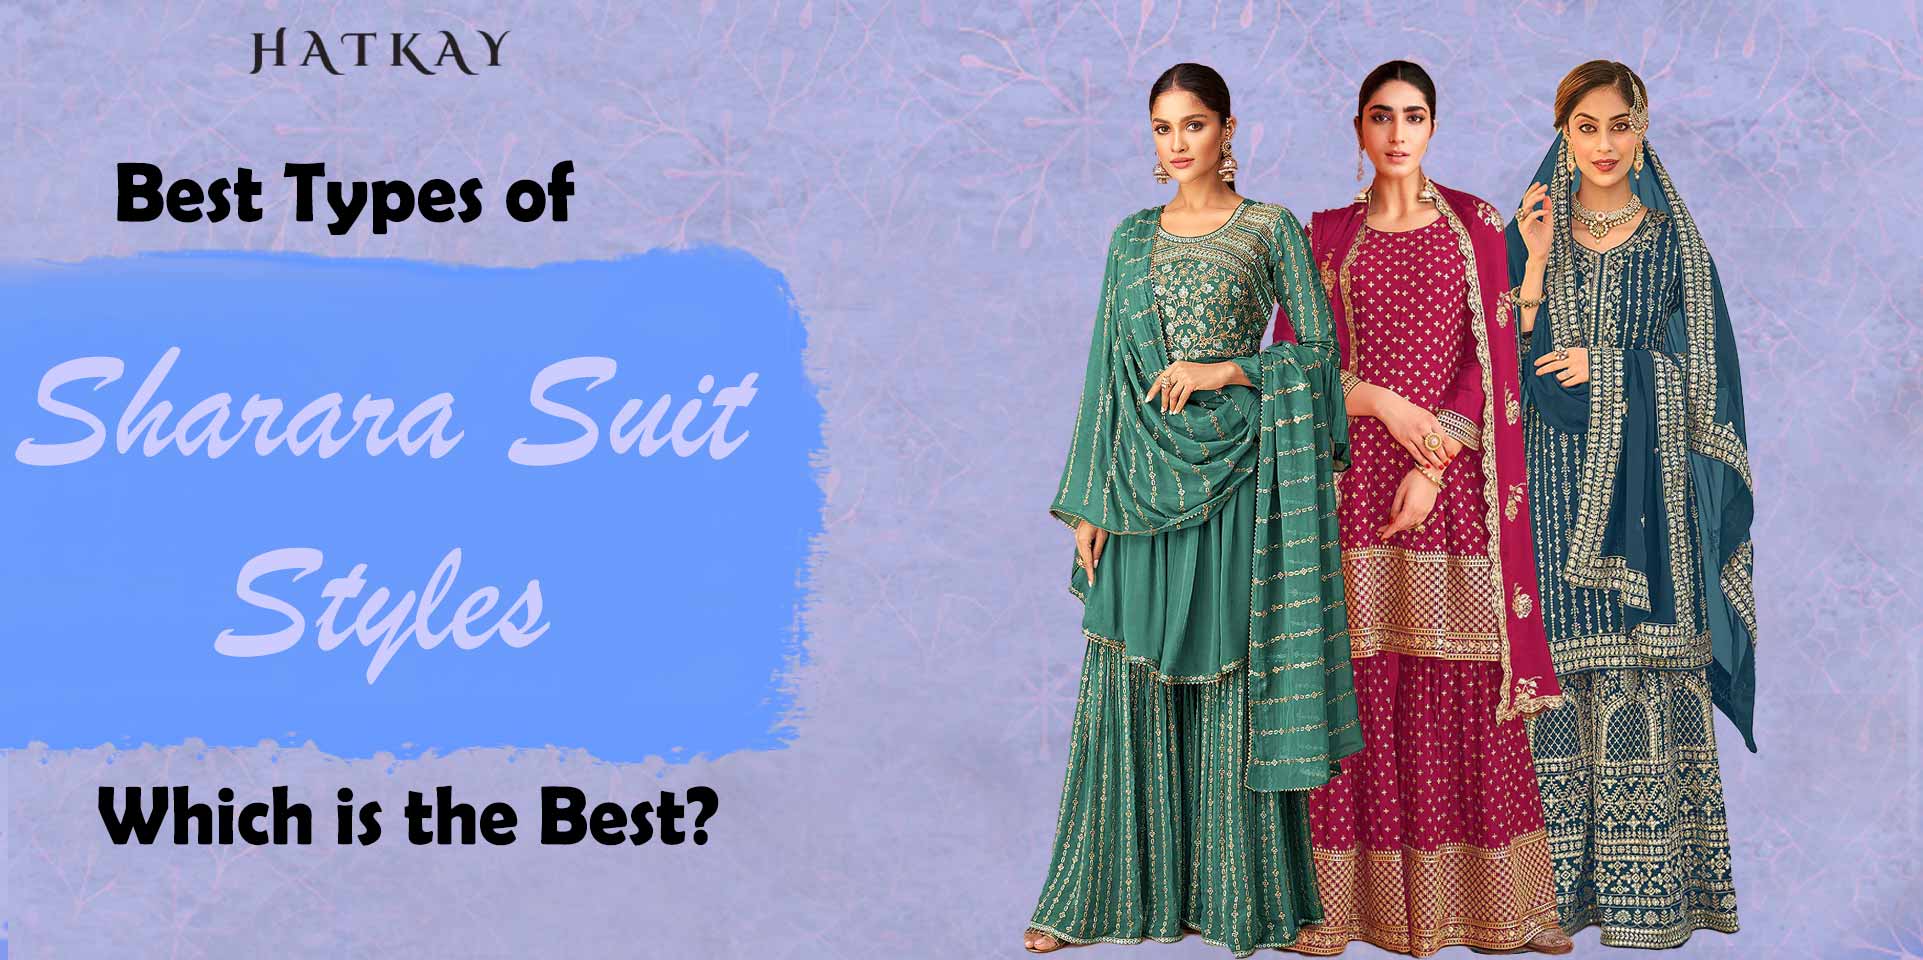 How Many Types of Sharara Suit Styles are There? Which is the Best Sharara Suit Style?